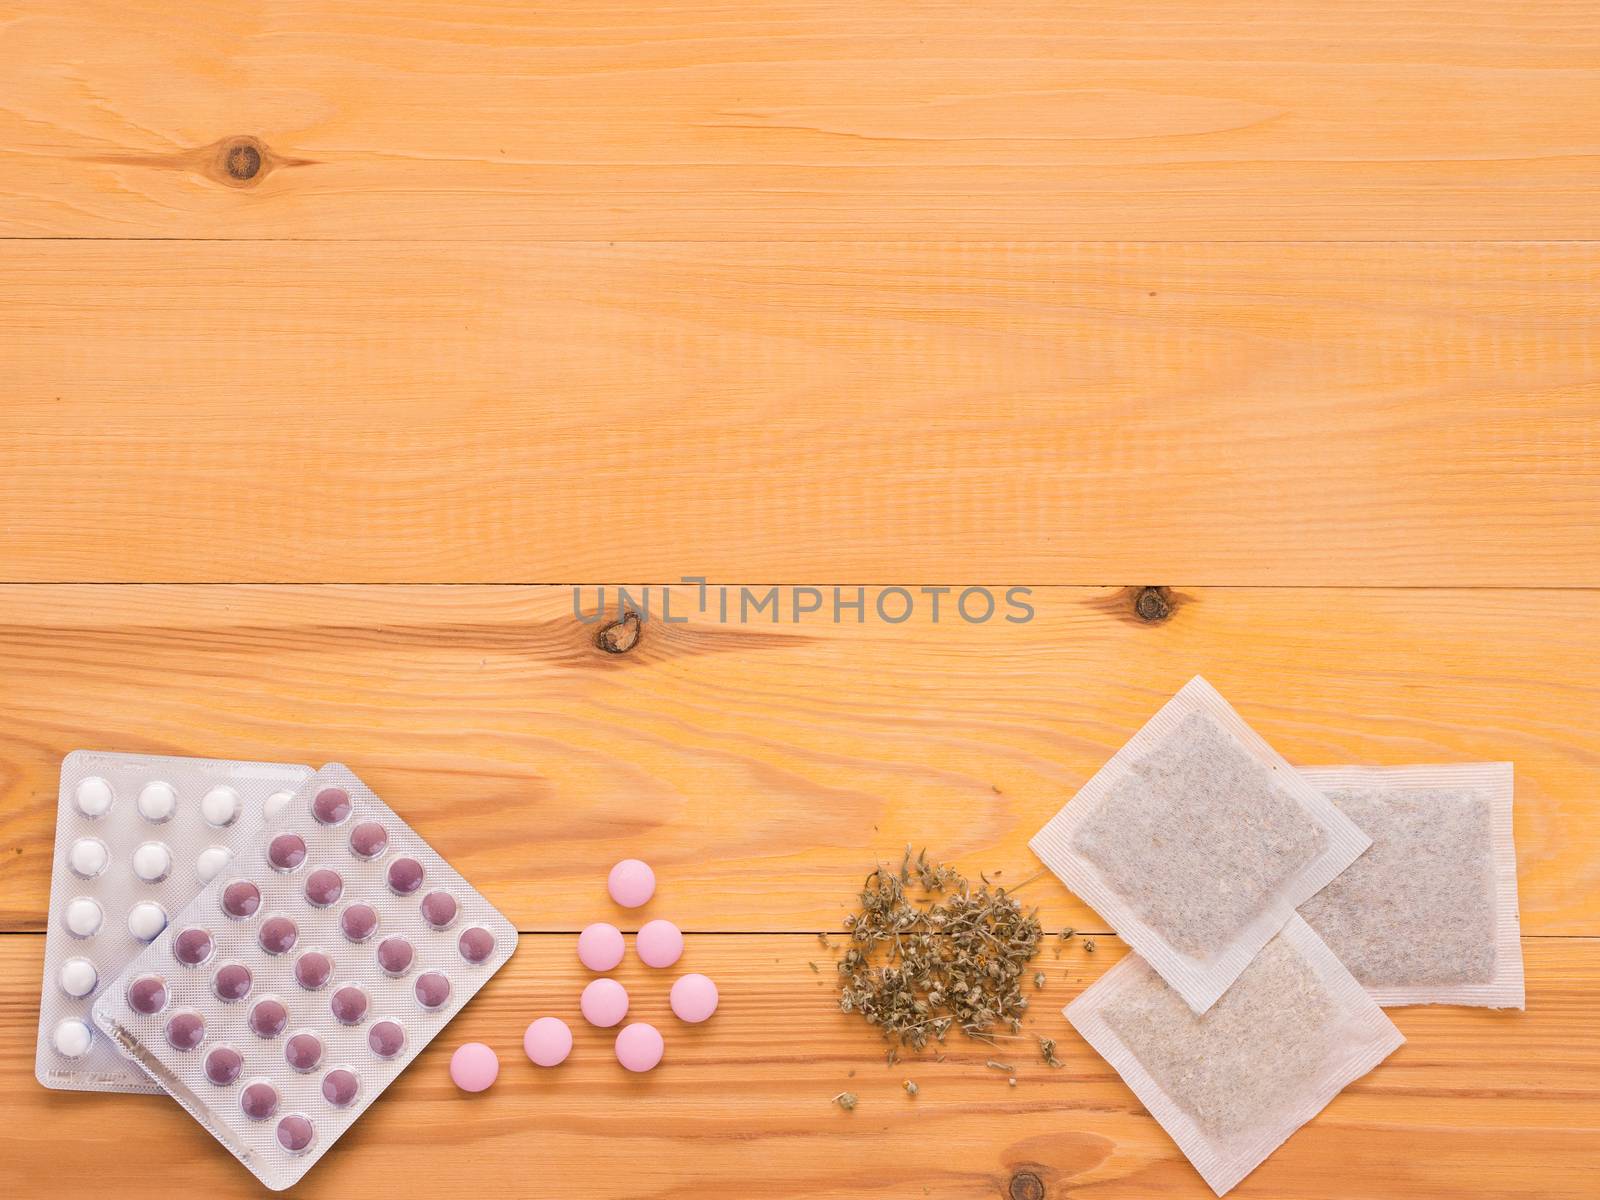 Herbal medicine and Chemical medicine the alternative healthy care on a light wooden background with copy space. Flat lay or top view